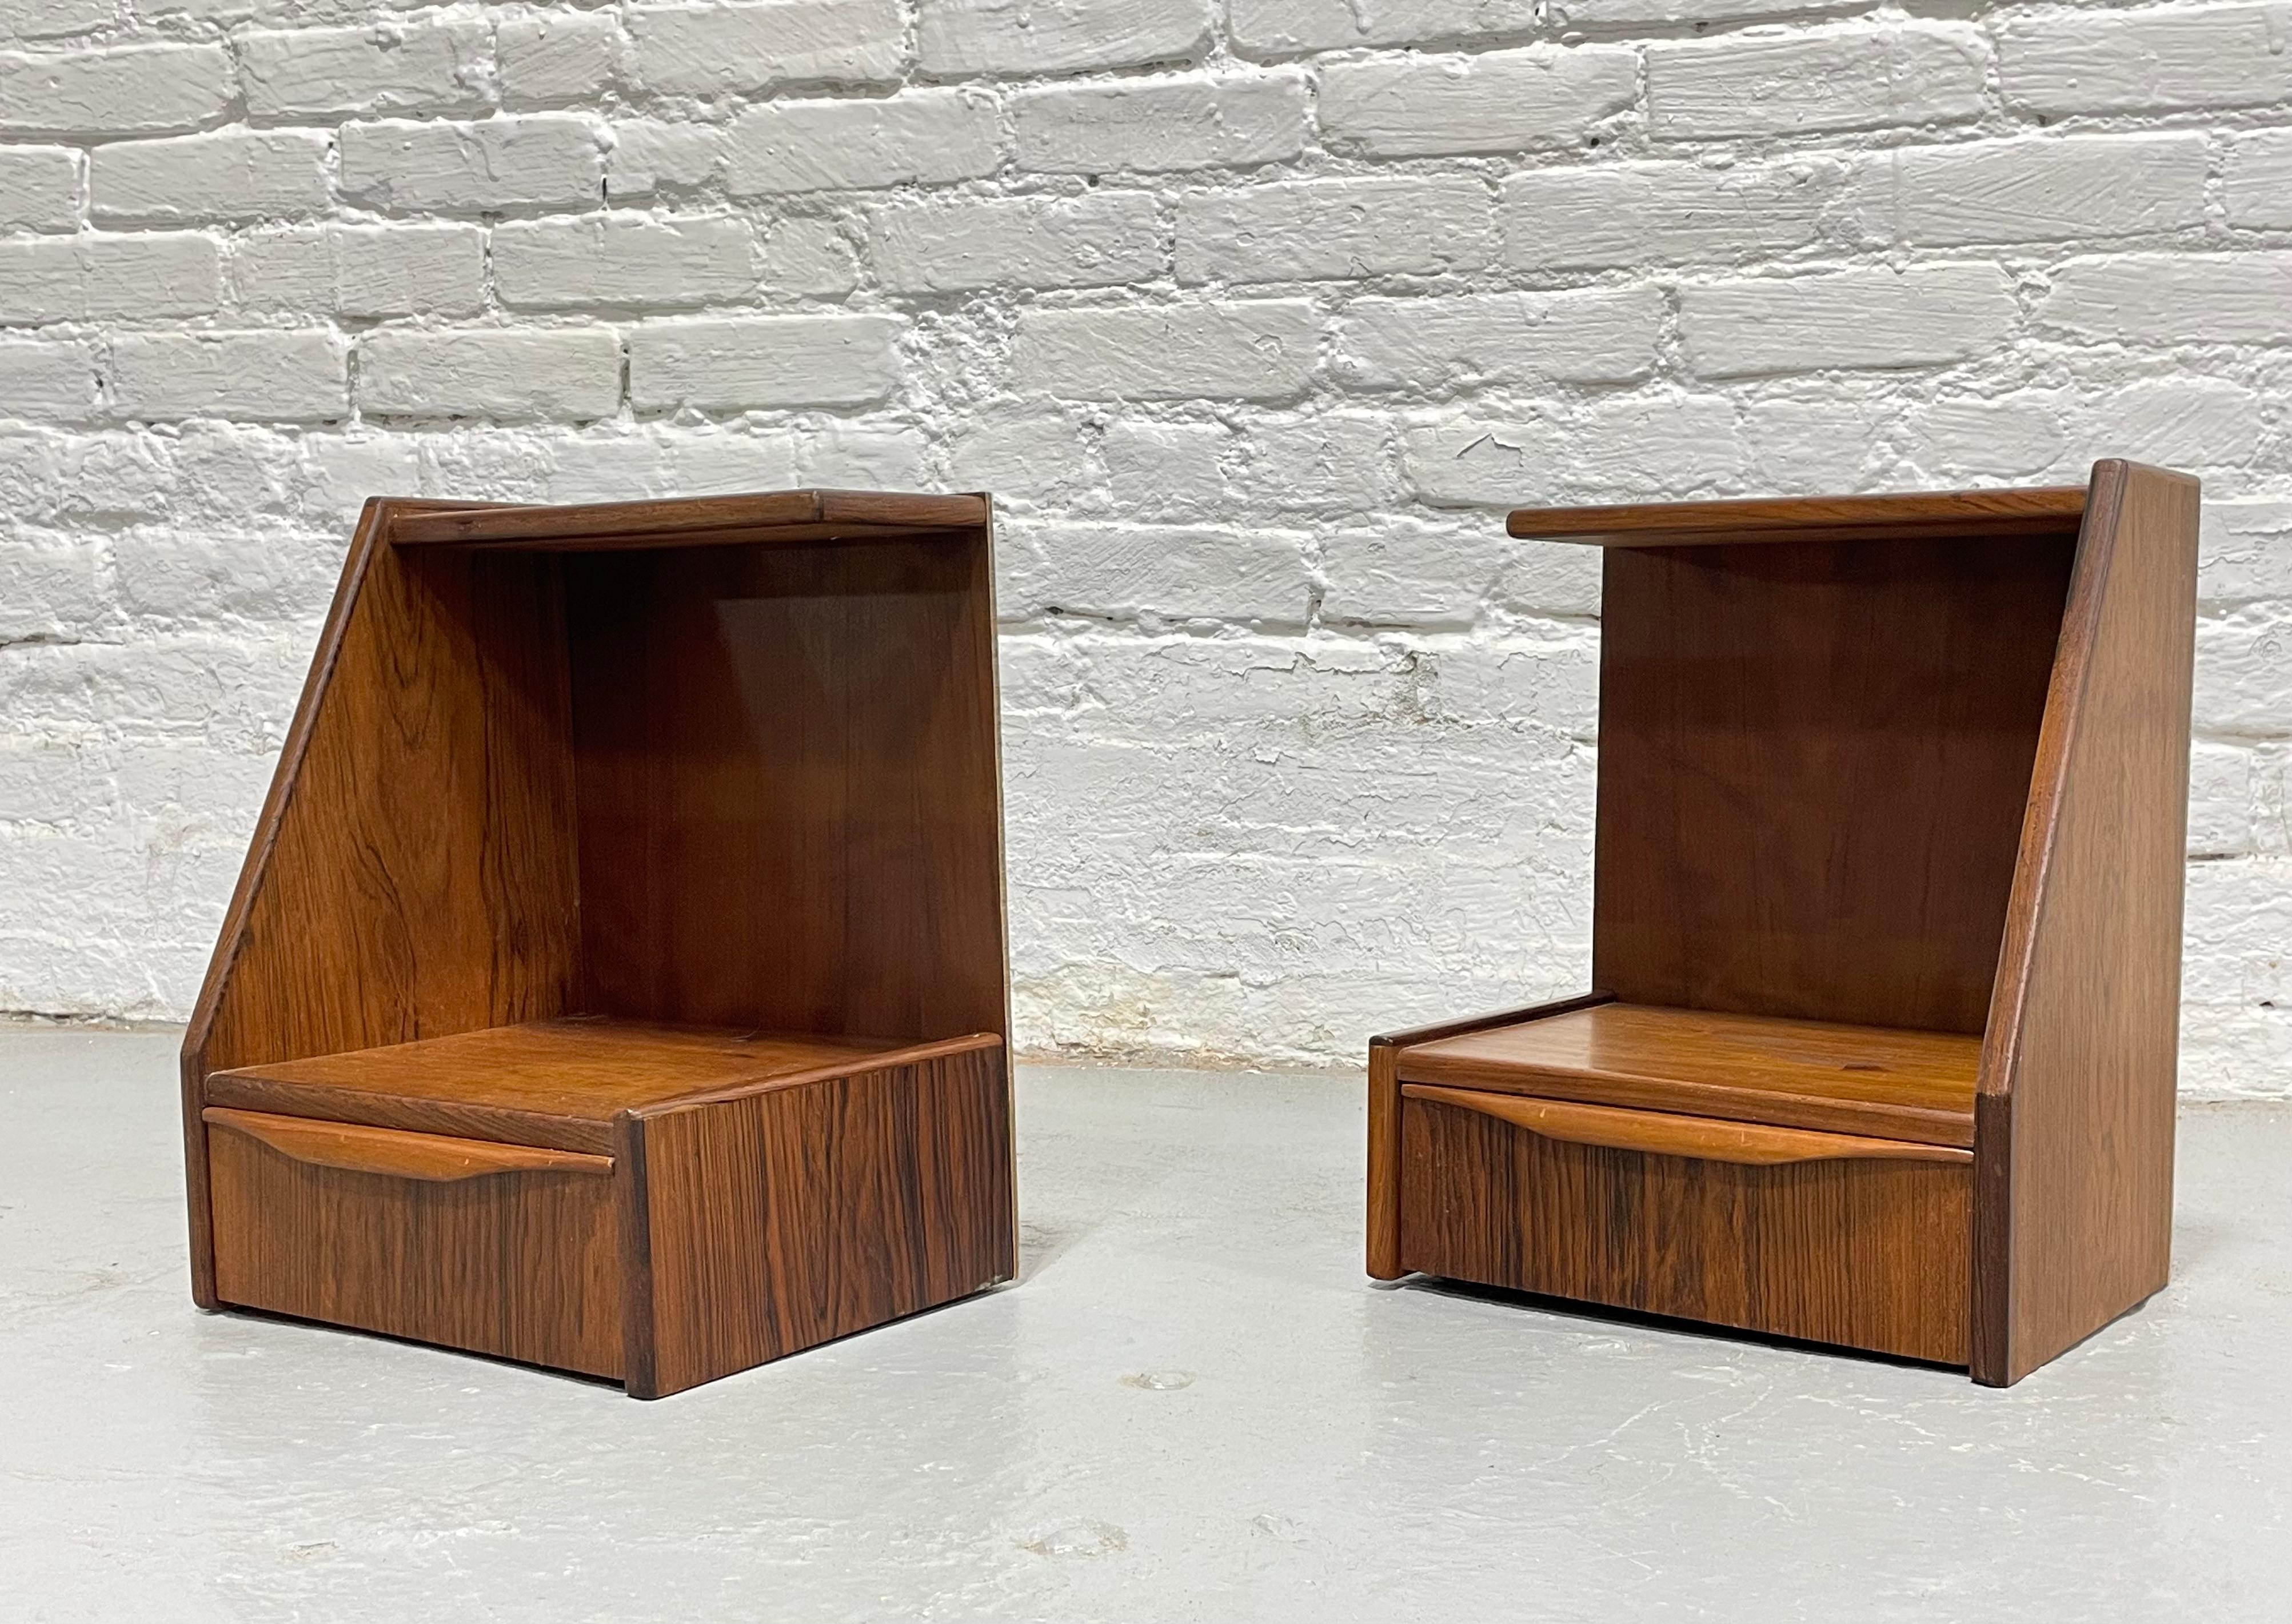 Rosewood DANISH Mid Century Modern ROSEWOOD Hanging NIGHTSTANDS / Bedside Tables, c. 1950 For Sale